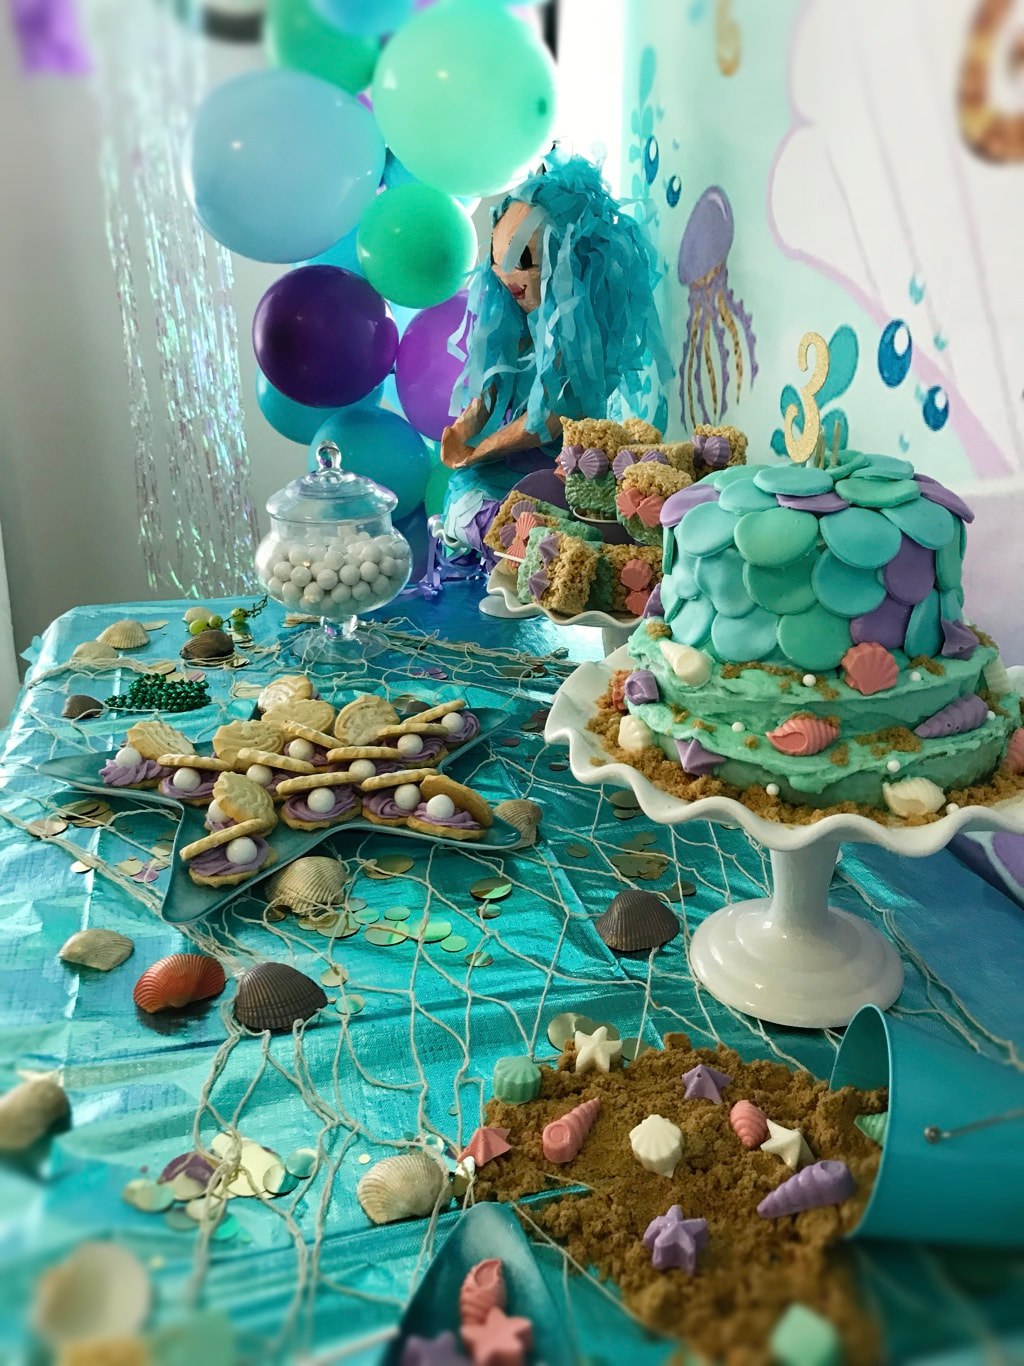 Mermaid 3rd Birthday Party Table with Cake and Desserts - Land of Lloyds